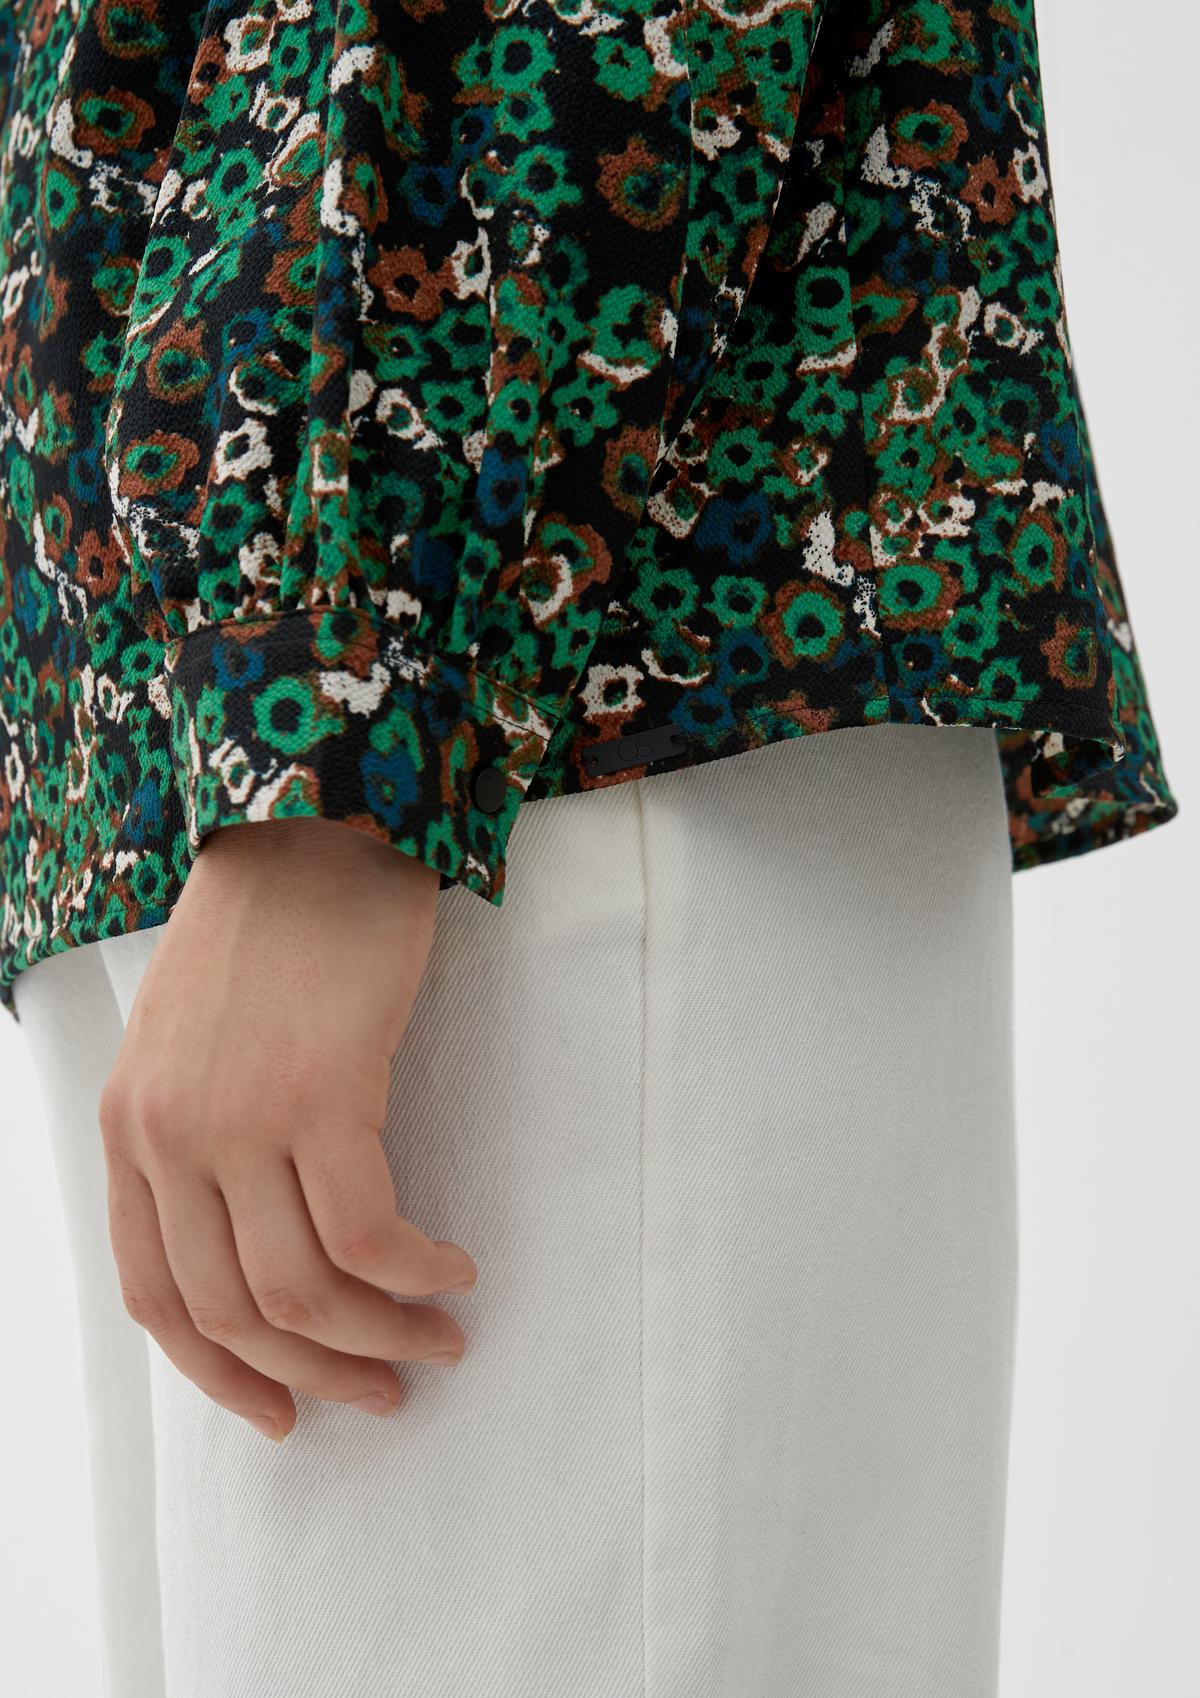 s.Oliver Luchtige blouse met print all-over